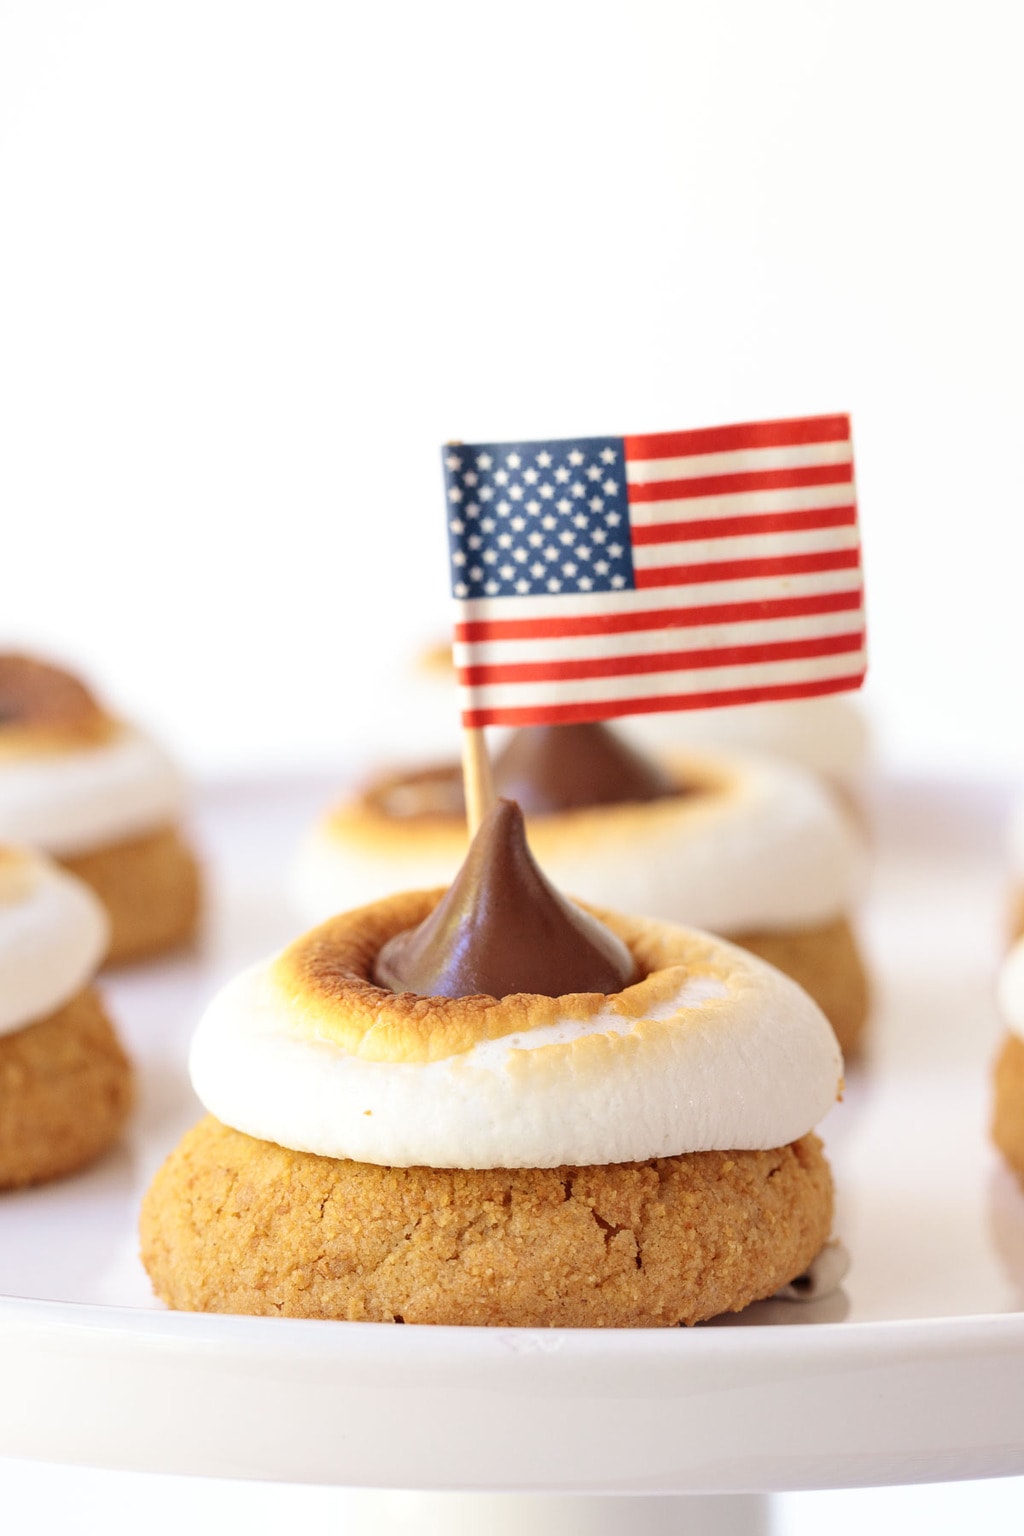 Photo of a serving platter of S'mores Blossom Cookies with American Flags in the center of each.